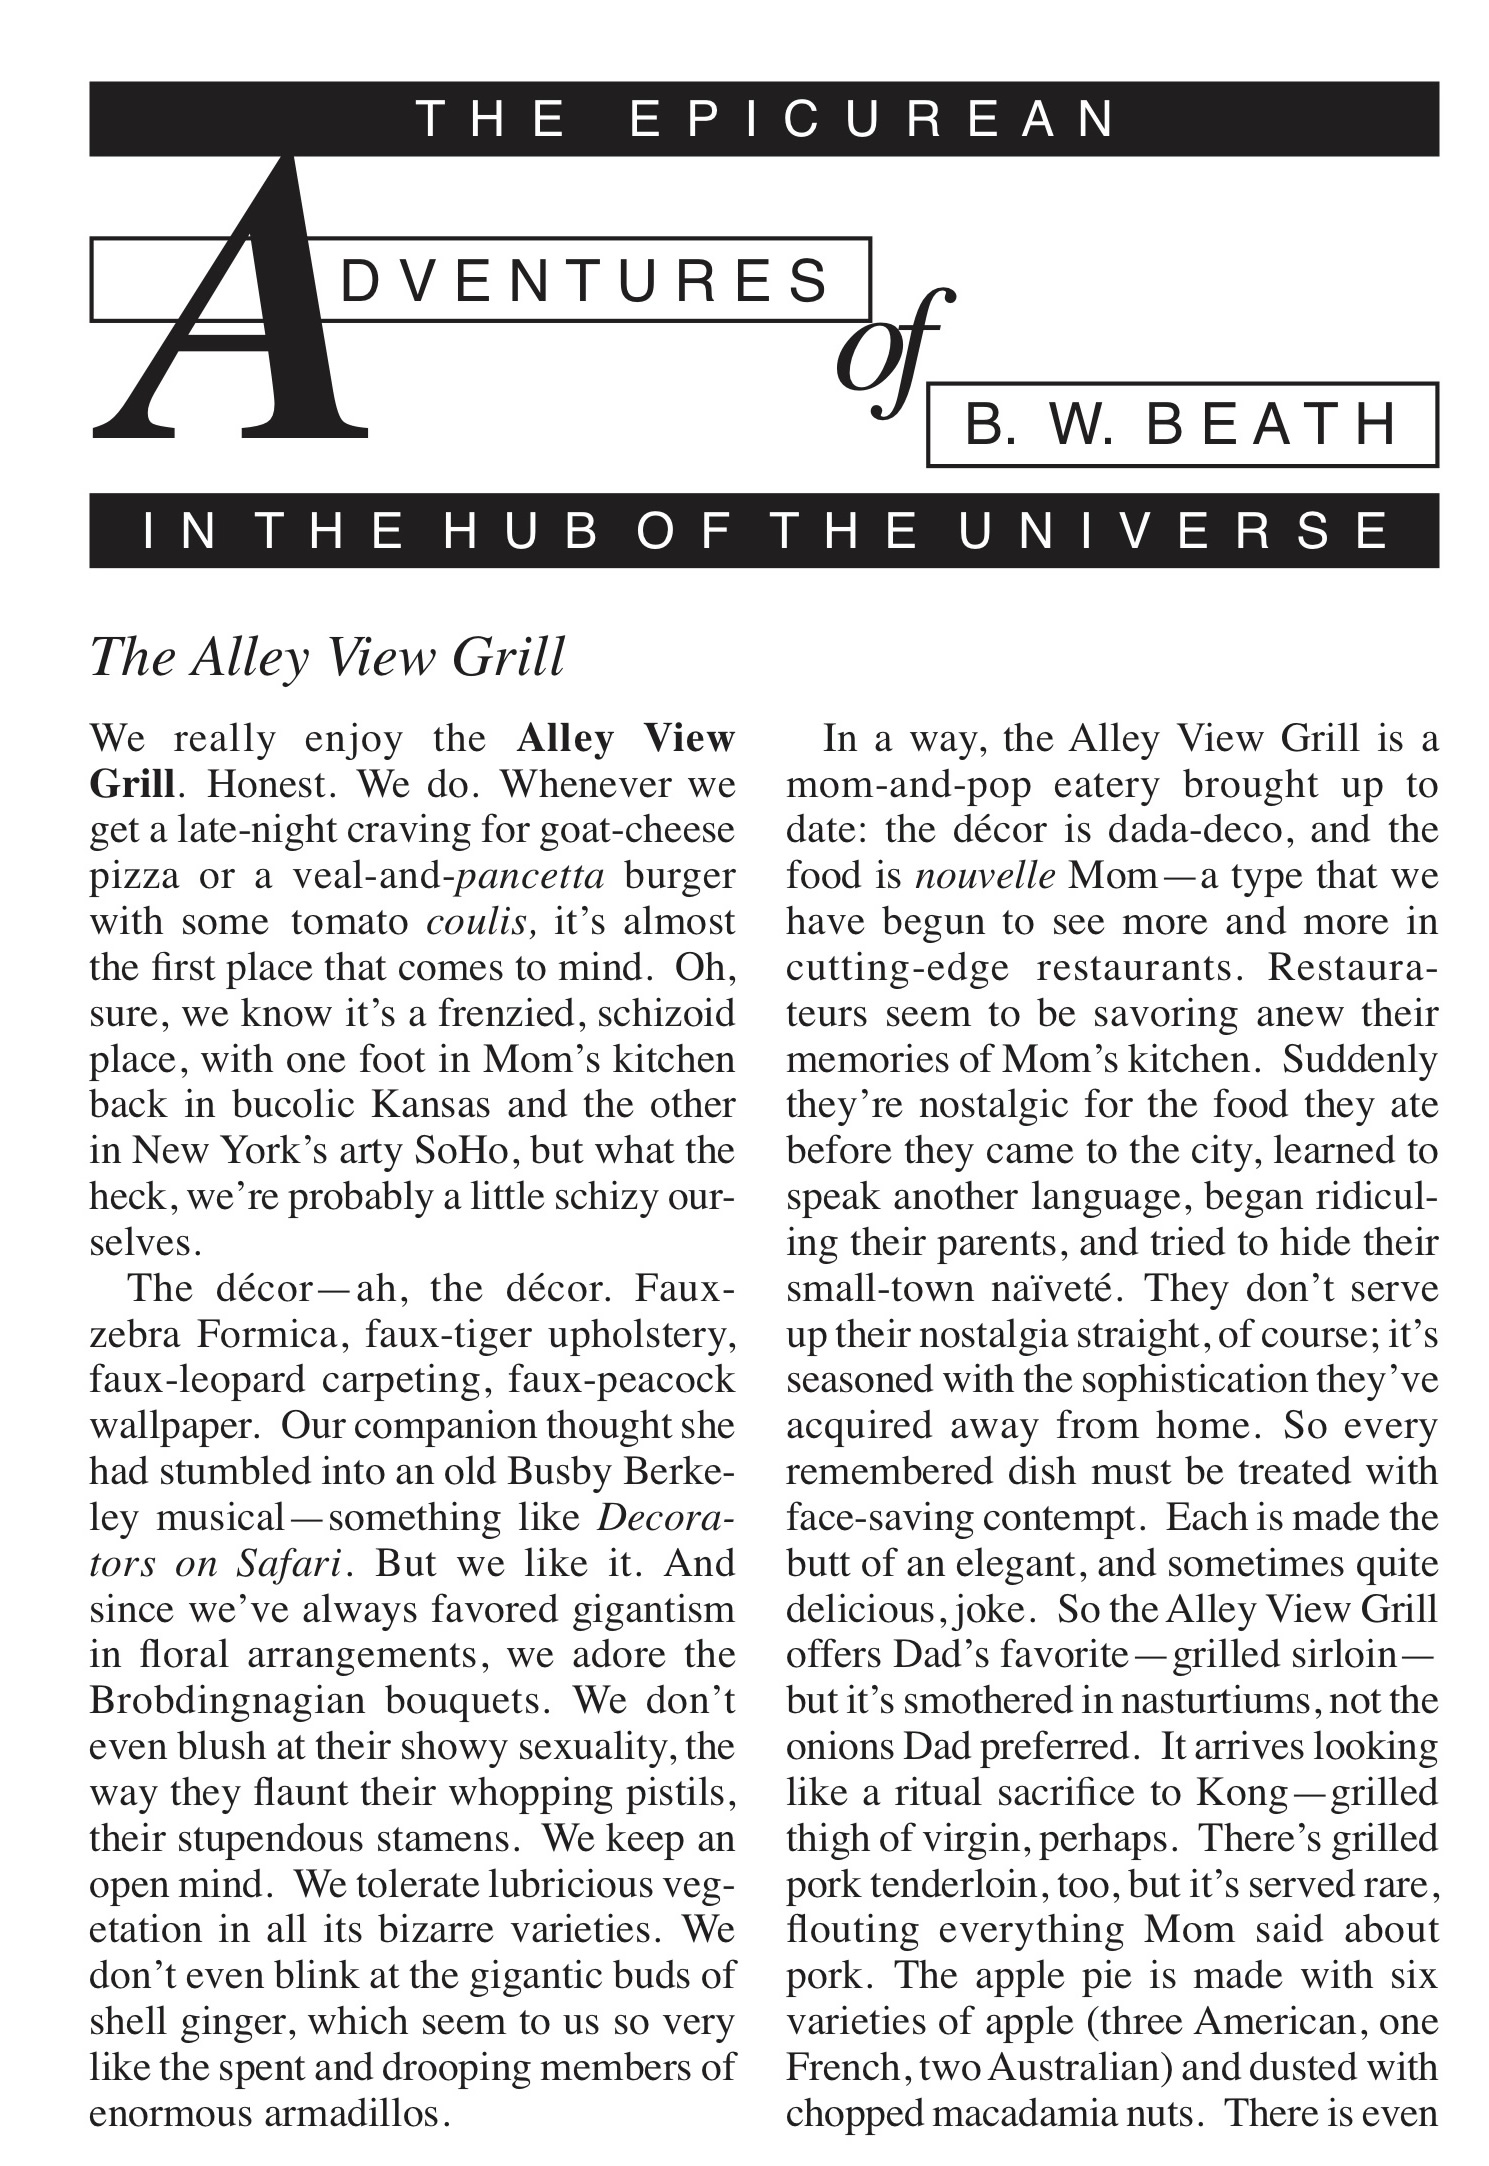 Alley View Grill Review, part one